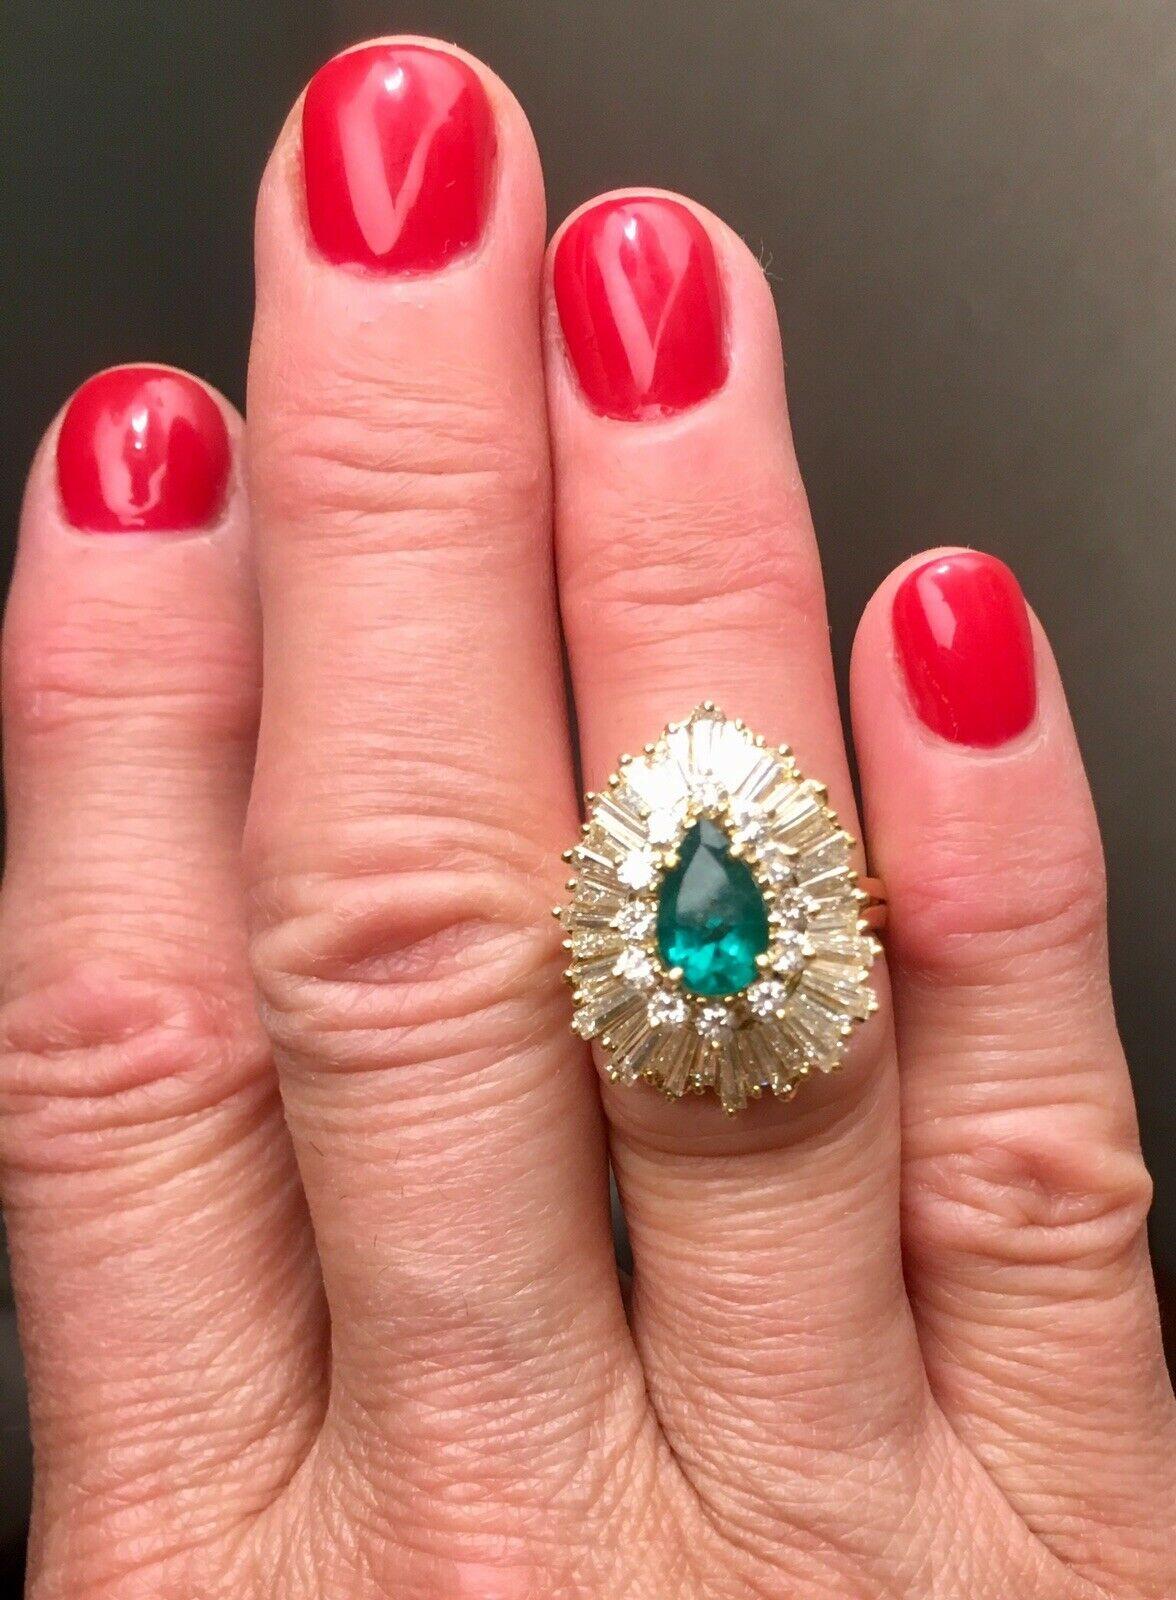 Vintage Estate 3.44 Carat Diamond Halo Emerald Ballerina Cocktail Ring In Excellent Condition For Sale In Shaker Heights, OH